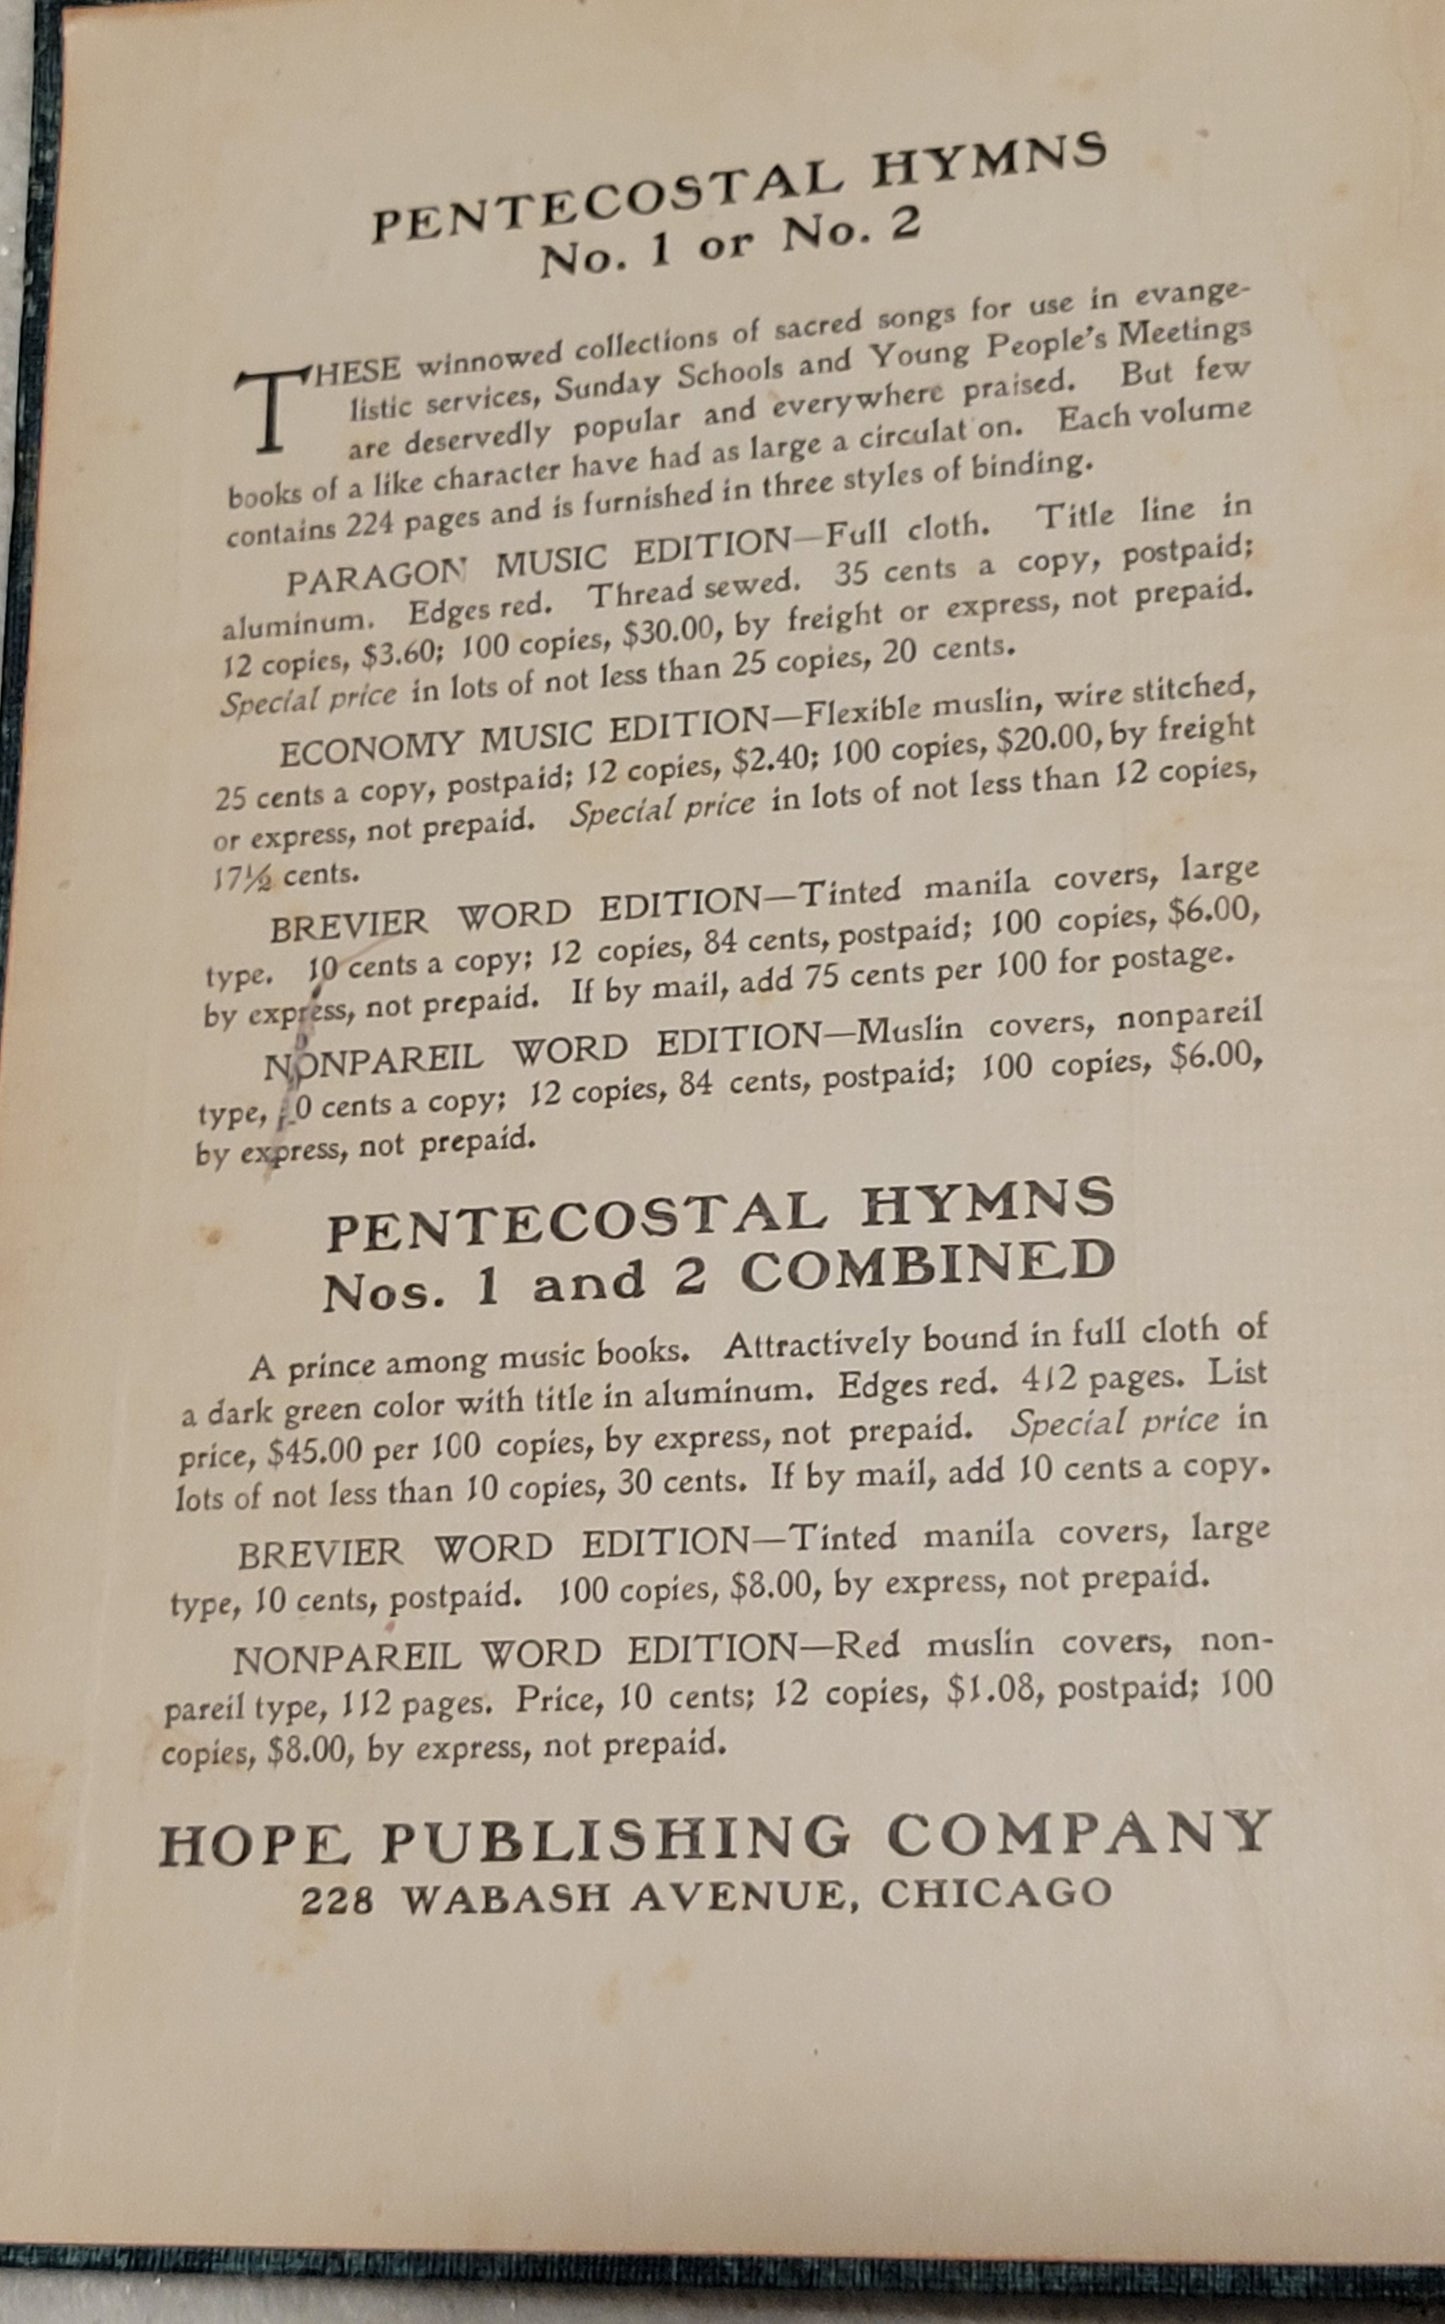 Vintage book for sale, Pentecostal hymns, published by Hope Publishing Company in Chicago. View of title page.